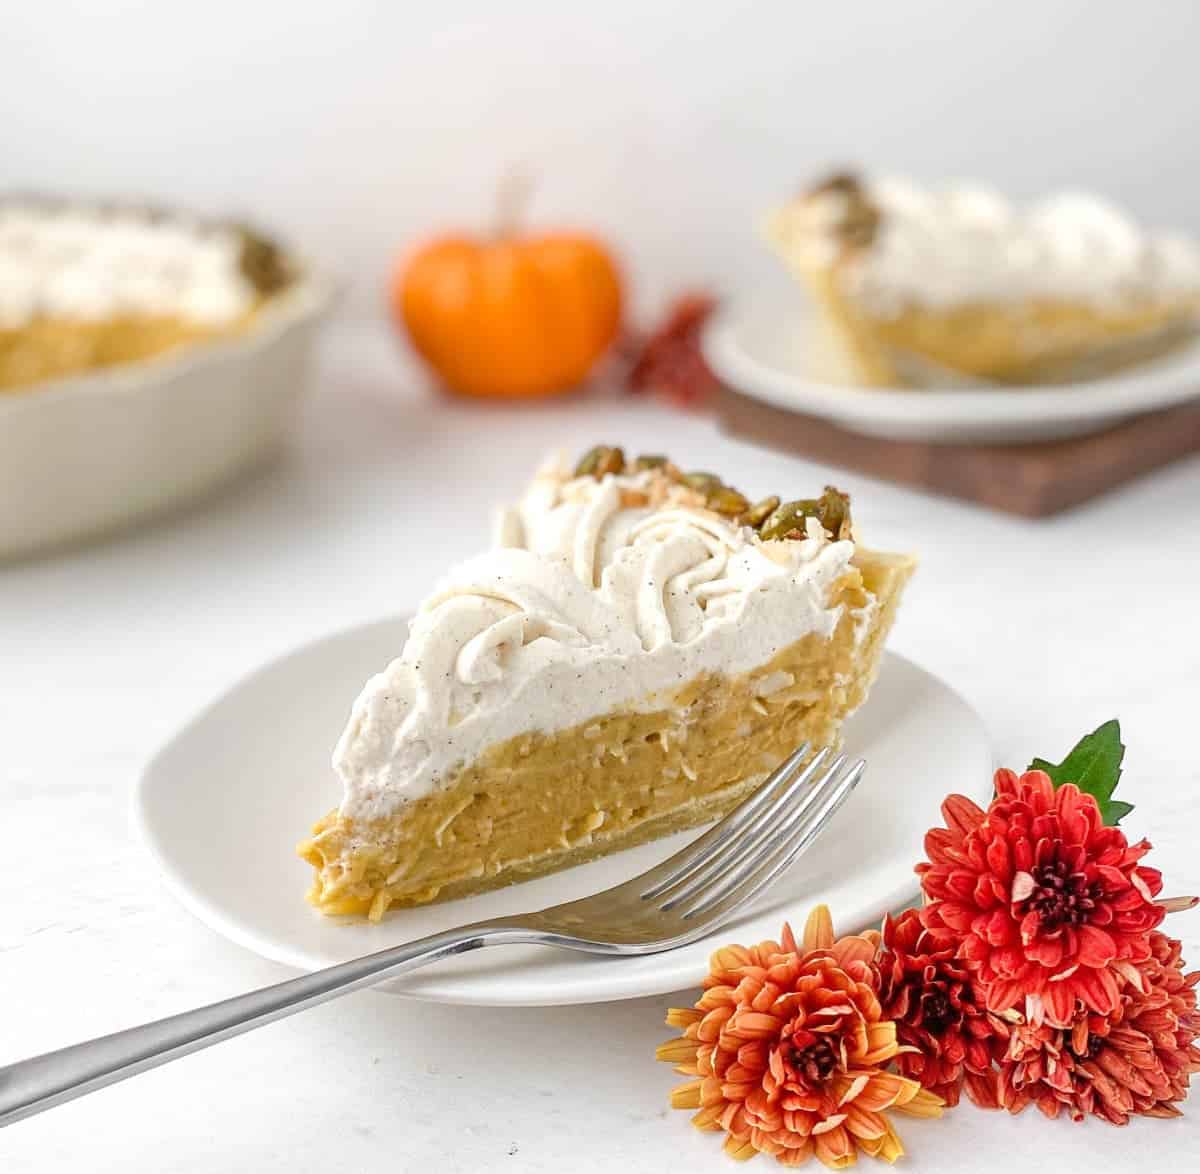 Slice of Pumpkin Coconut Cream Pie on a white plate with red mum flowers nearby